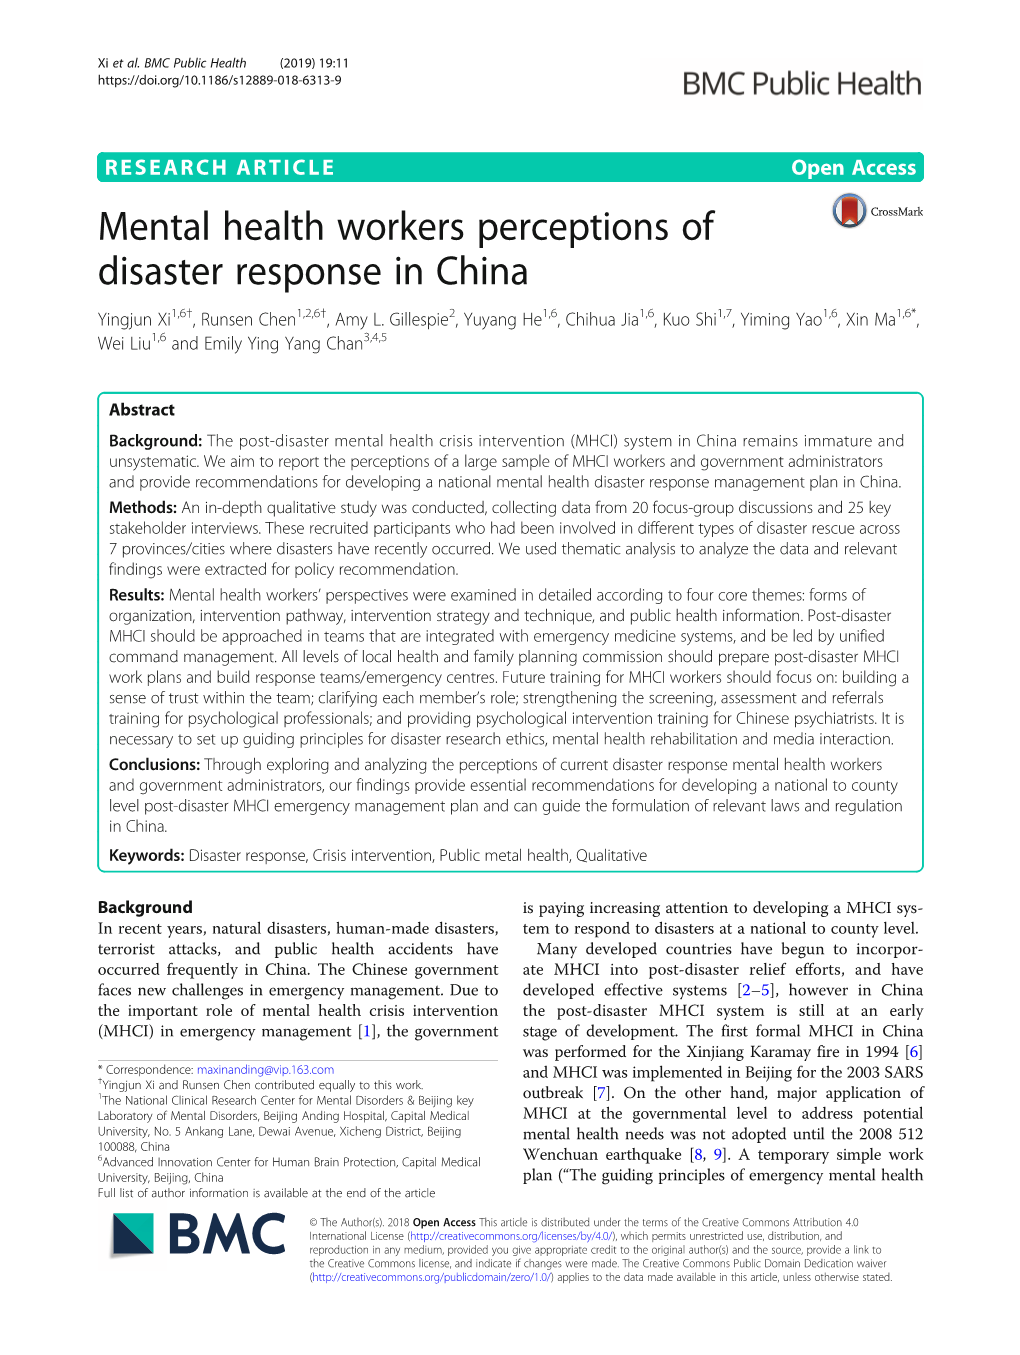 Mental Health Workers Perceptions of Disaster Response in China Yingjun Xi1,6†, Runsen Chen1,2,6†, Amy L